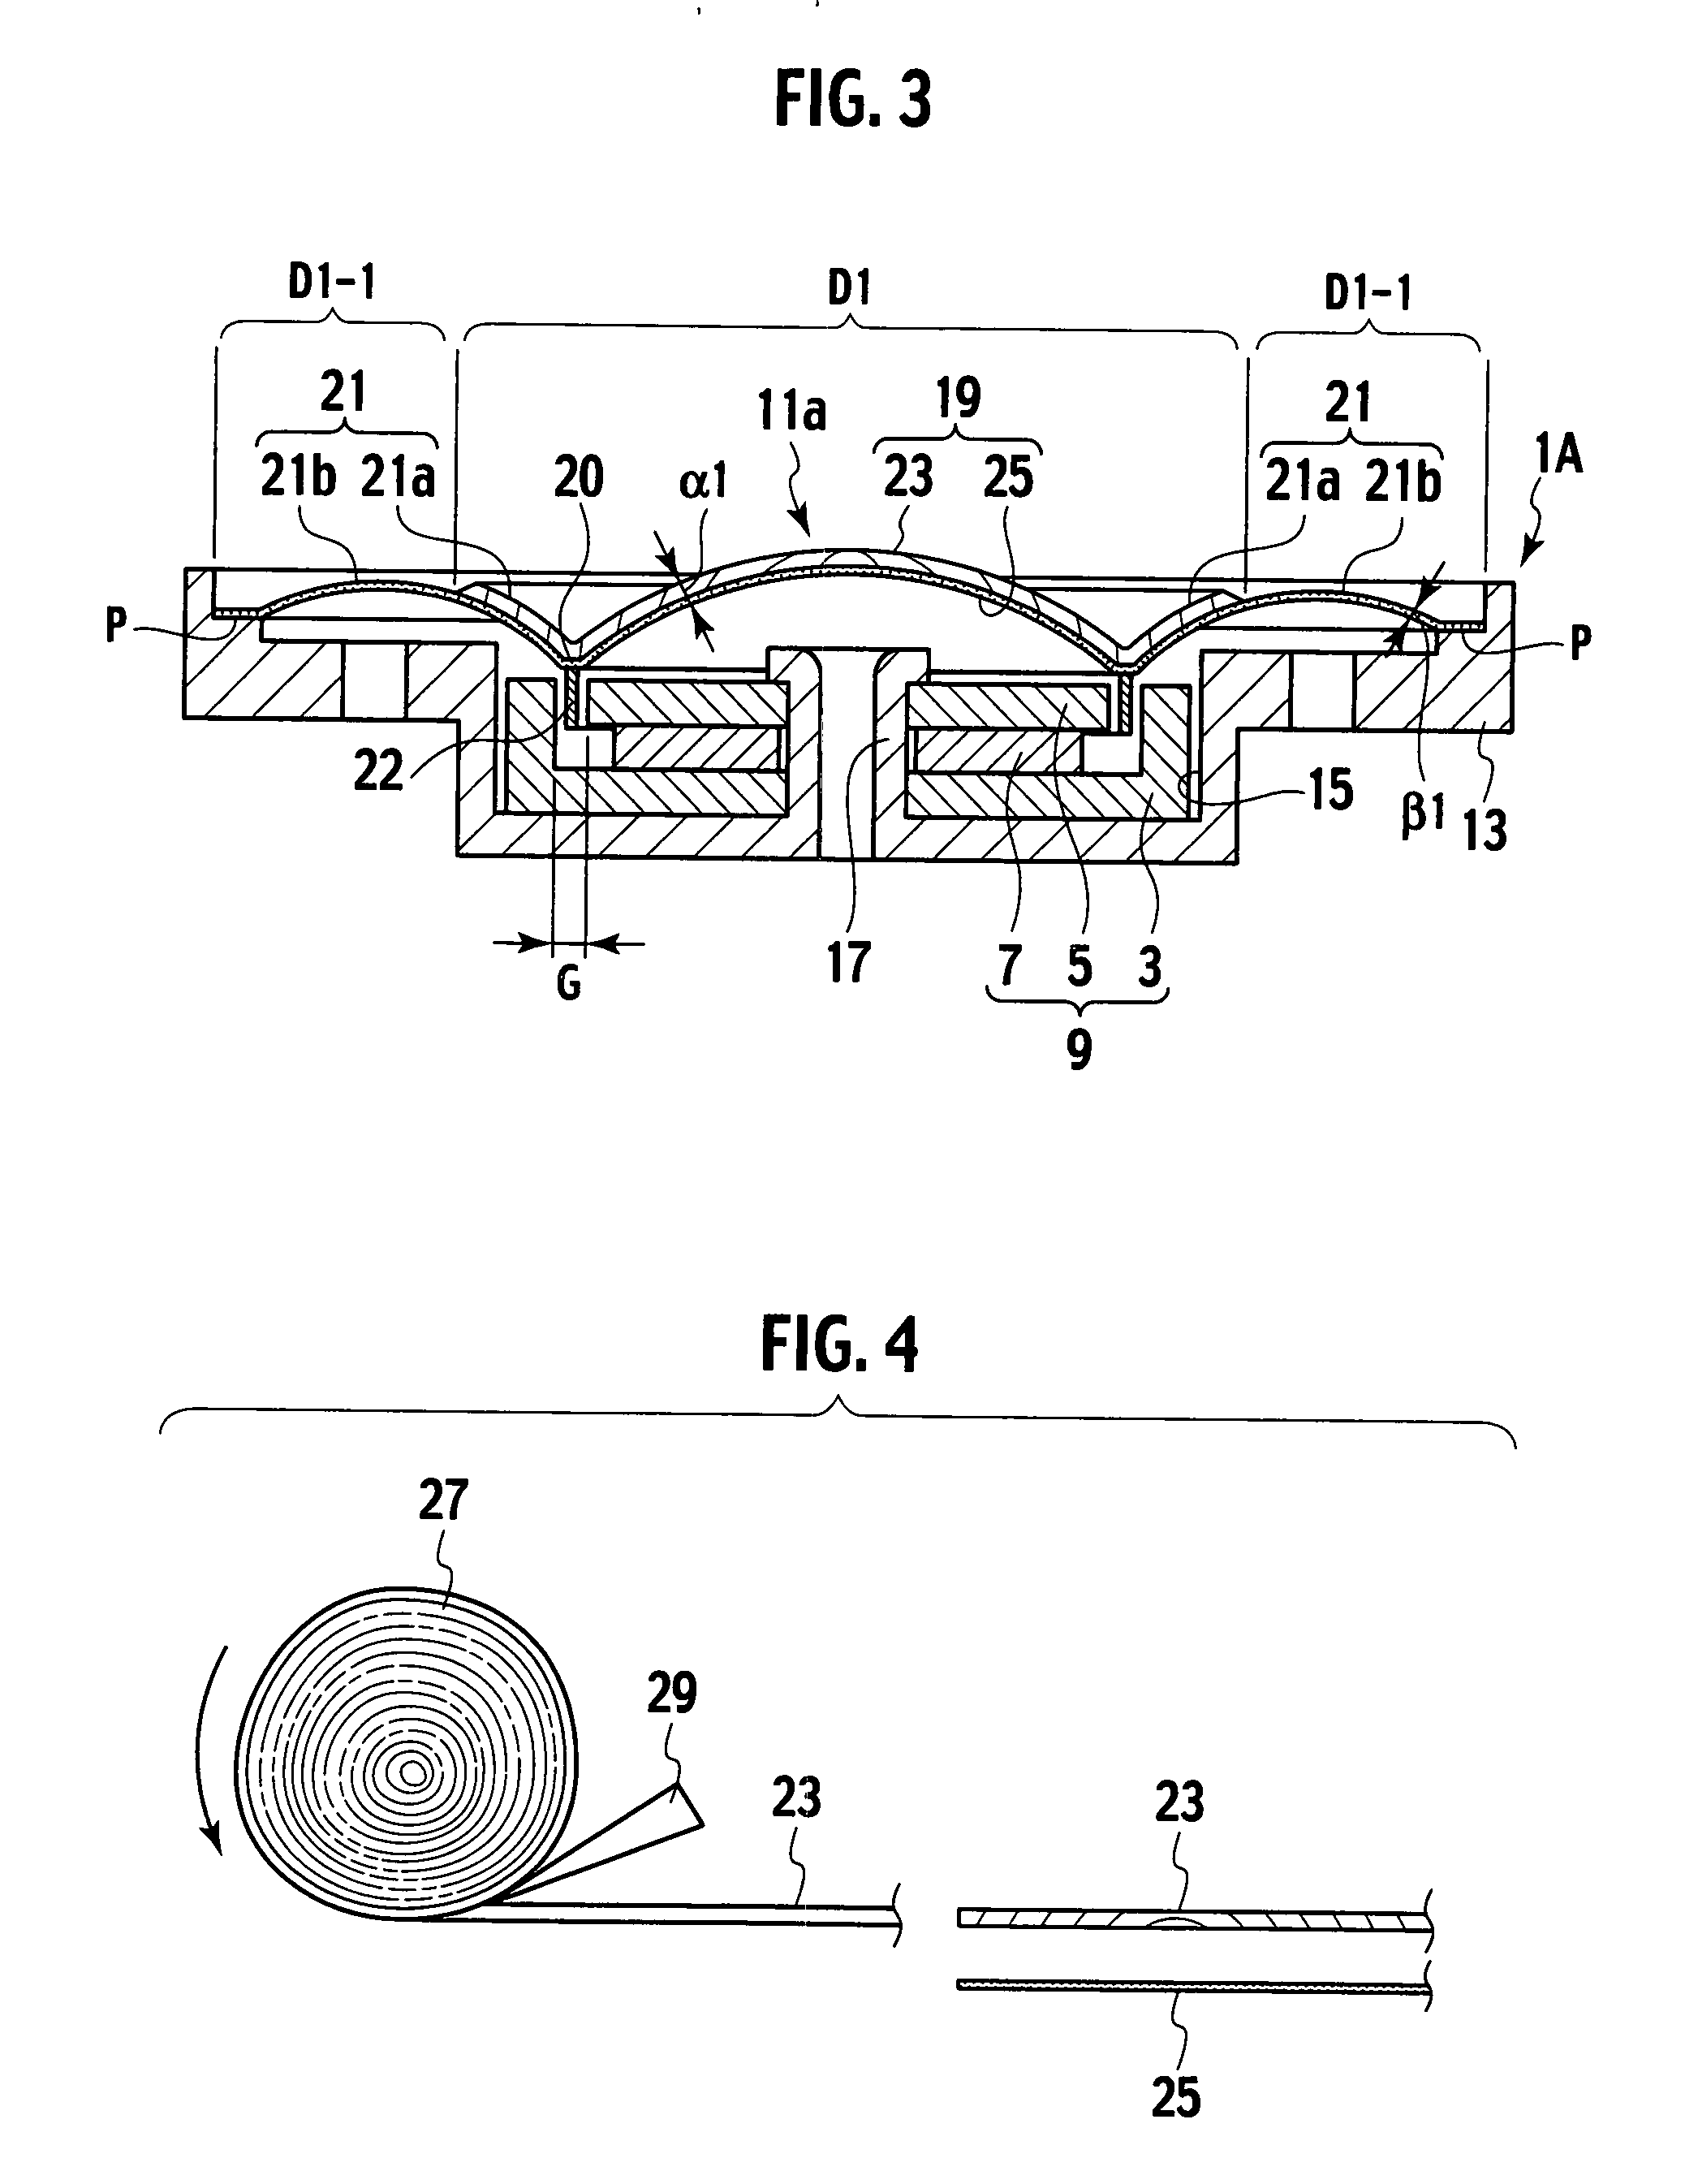 Electroacoustic transducer and diaphragm